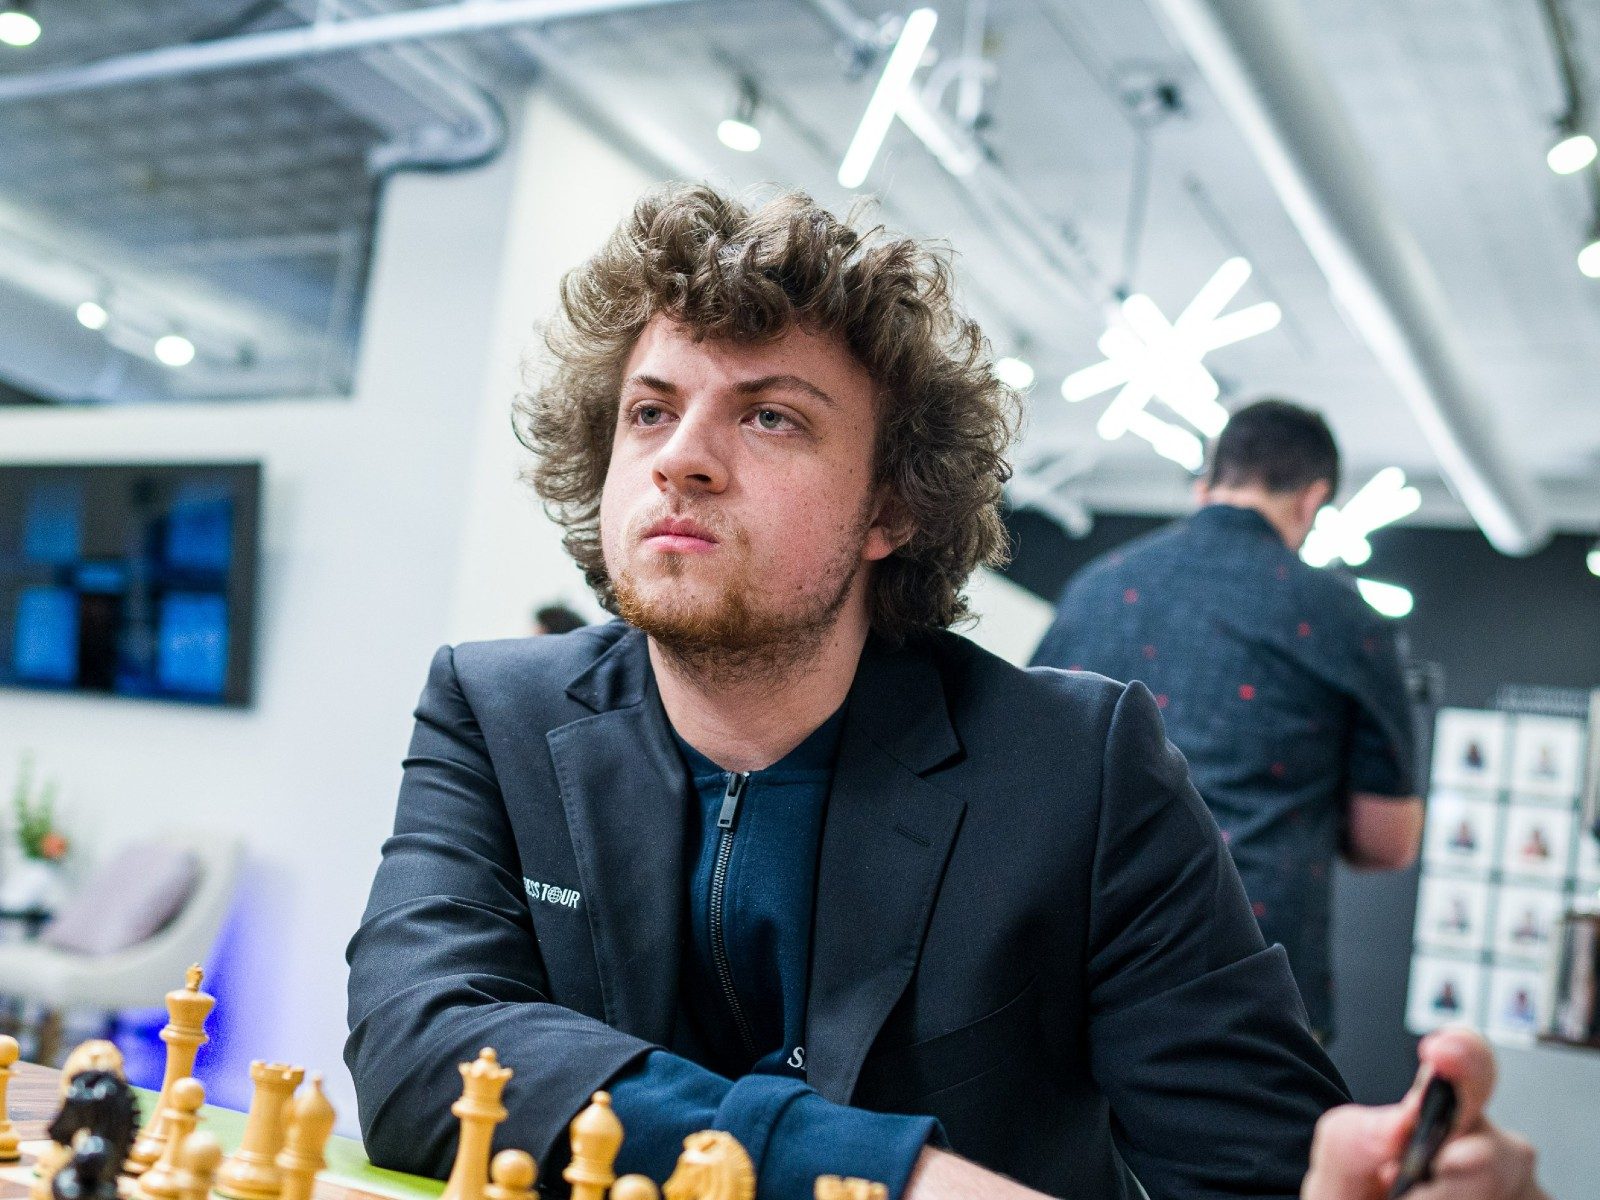 Chess: Grandmaster Hans Niemann cheated 'more than 100' times in online  games, claims report